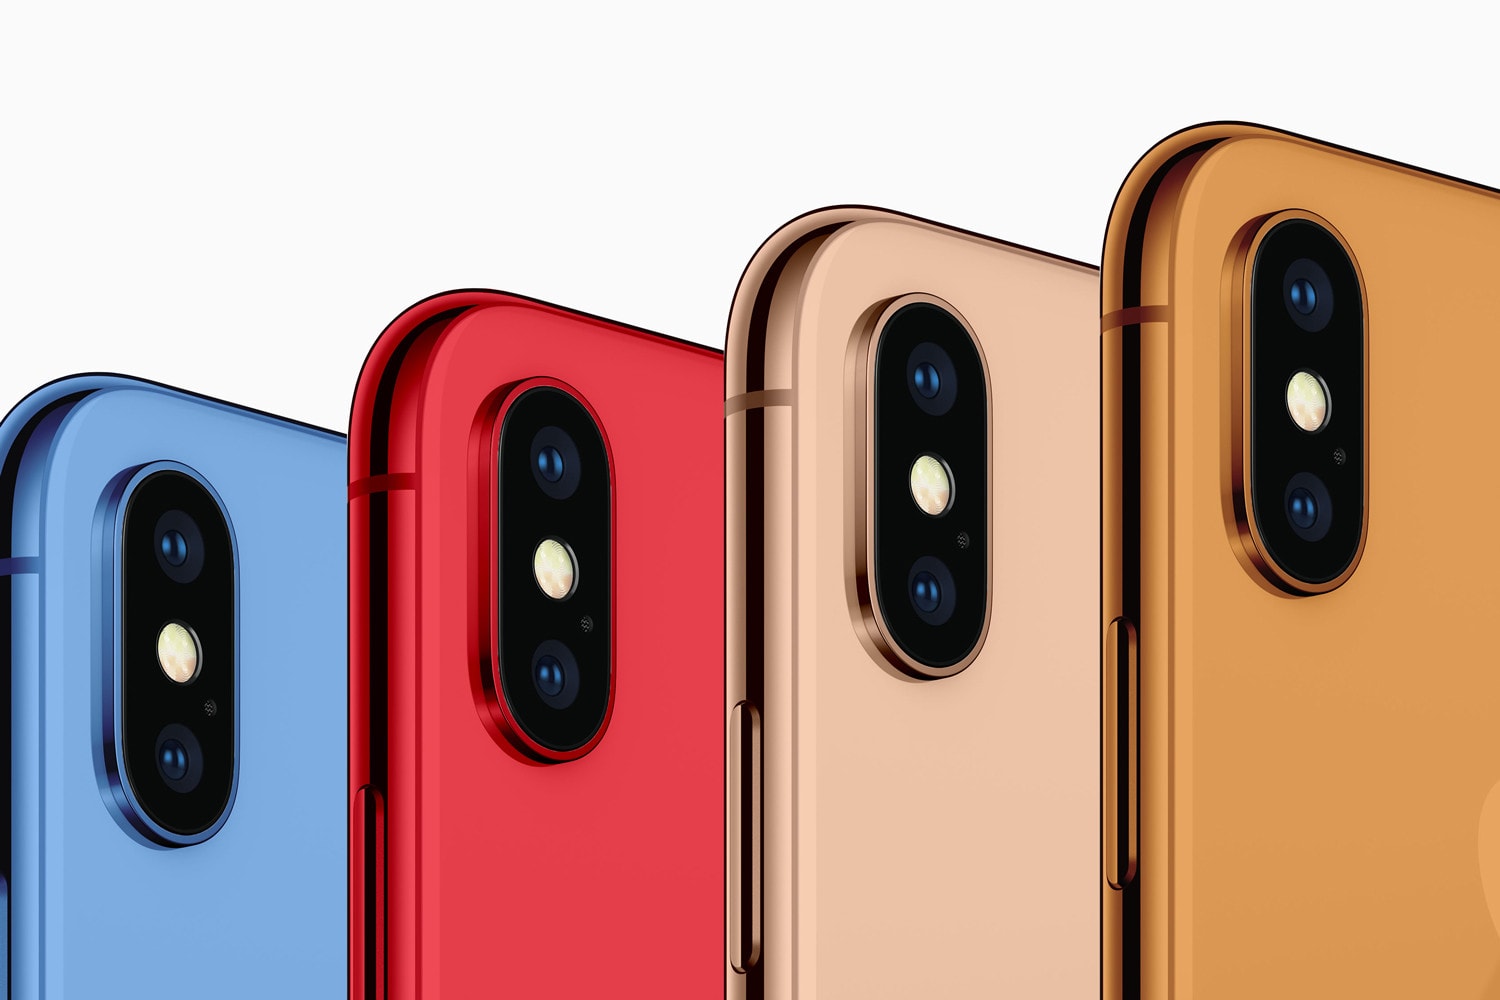 Apple iPhone 2018 Colors Blue Orange Gold Red Concept Image Rendering 6.5-inch OLED 6.1-inch LED